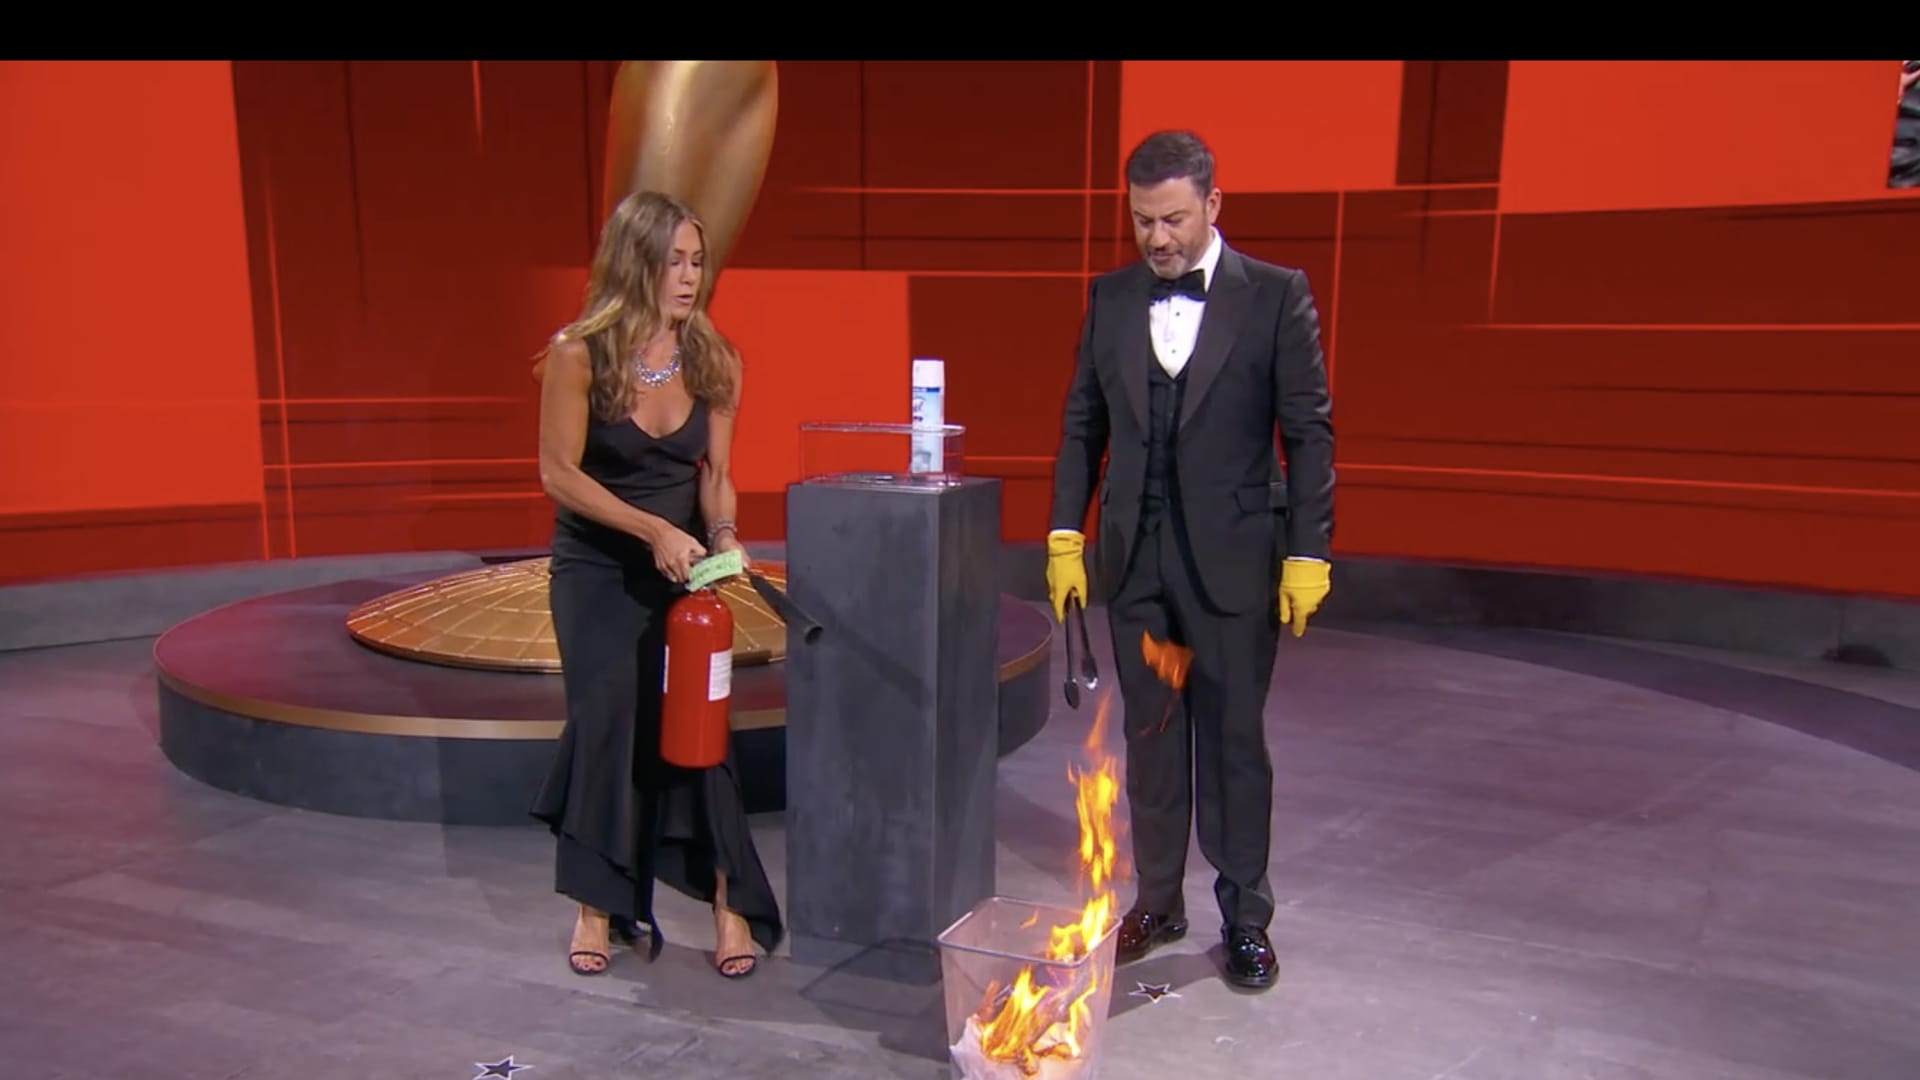 Host Jimmy Kimmel (right) and presenter Jennifer Aniston (right) work to put out a fire on the set of the 72nd Emmy Awards will broadcast SUNDAY, SEPT. 20 (8:00 p.m. EDT/6:00 p.m. MDT/5:00 p.m. PDT), on ABC. (ABC via Getty Images) JENNIFER ANISTON, JIMMY KIMMEL